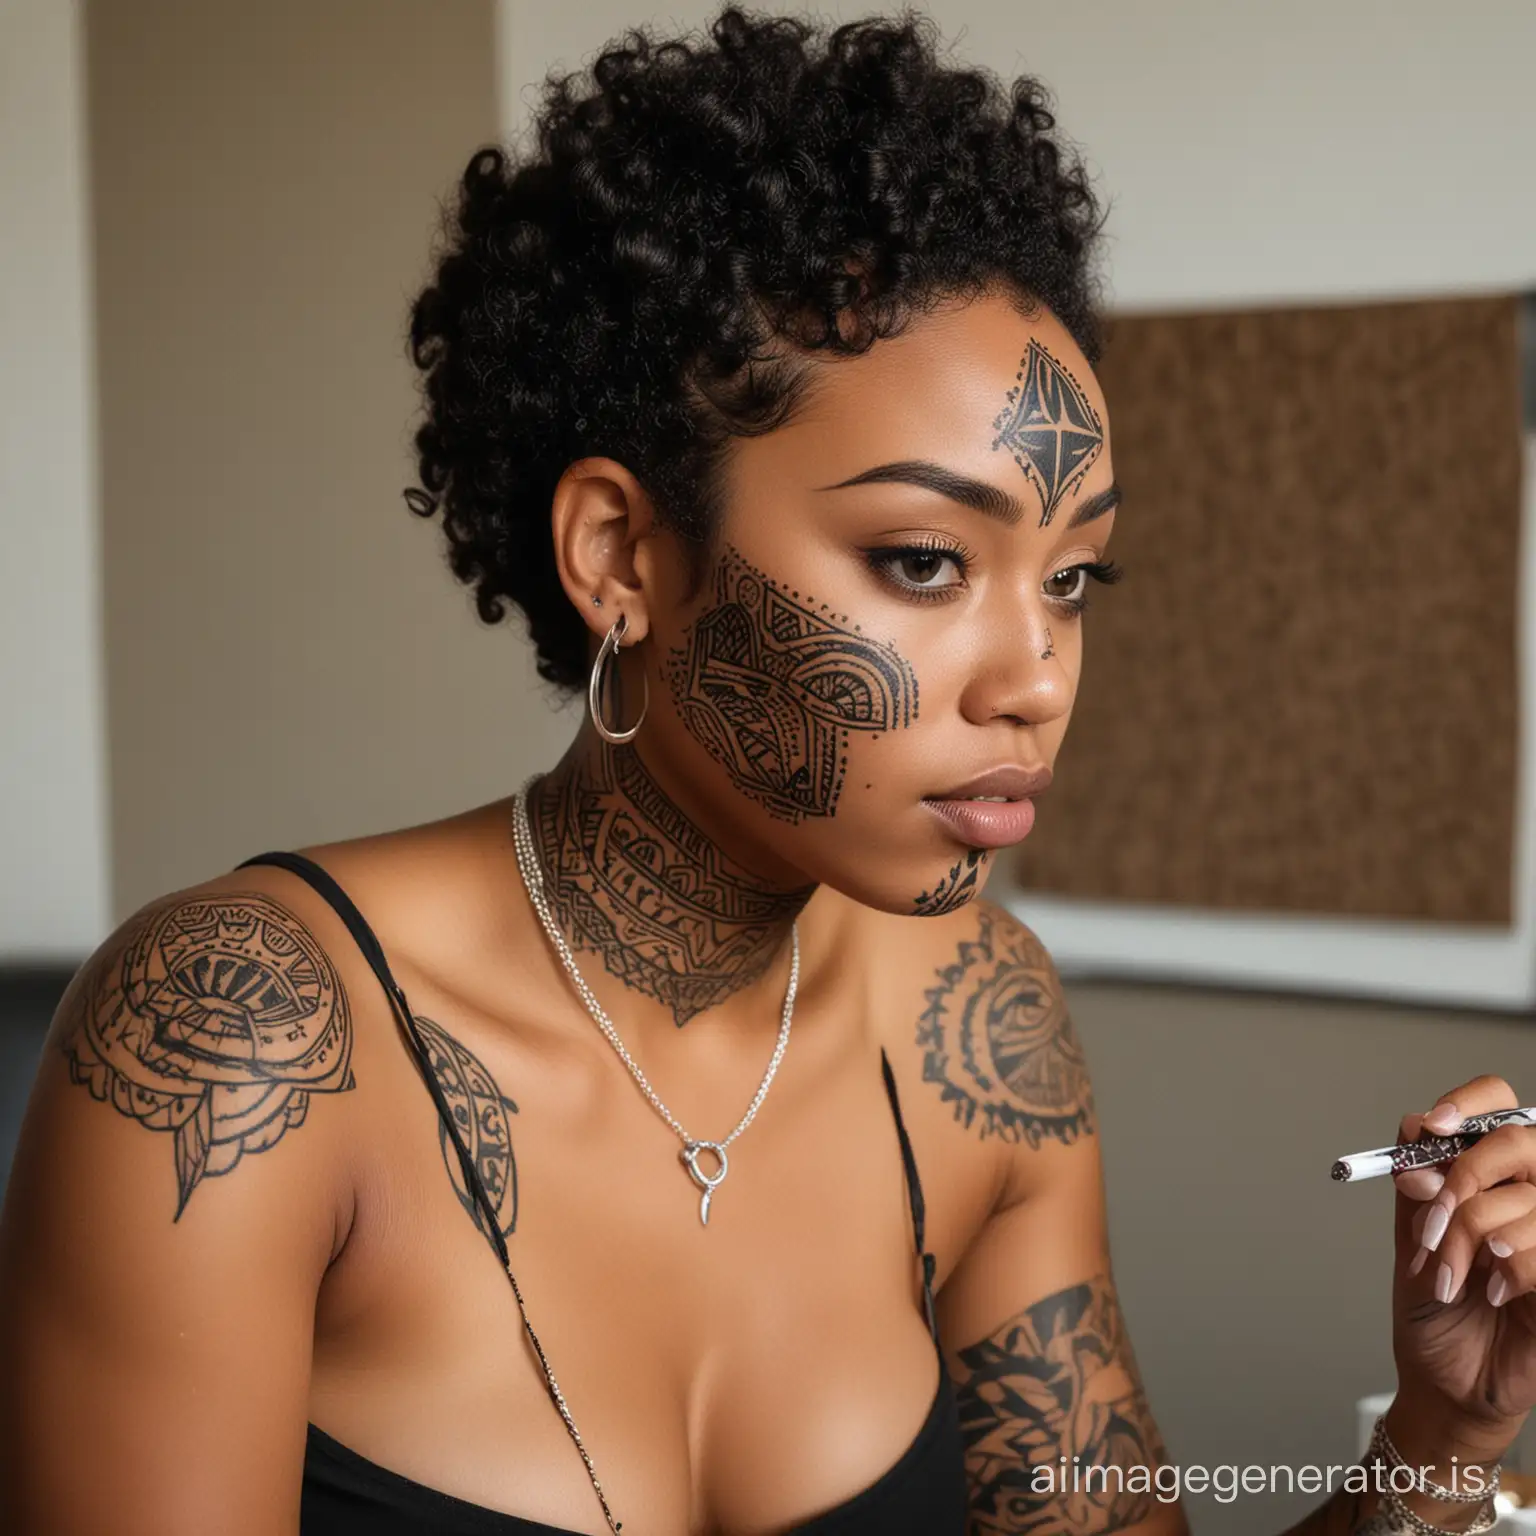 Afro-Indigenous woman wearing head and face mask doing tattoos and piercings